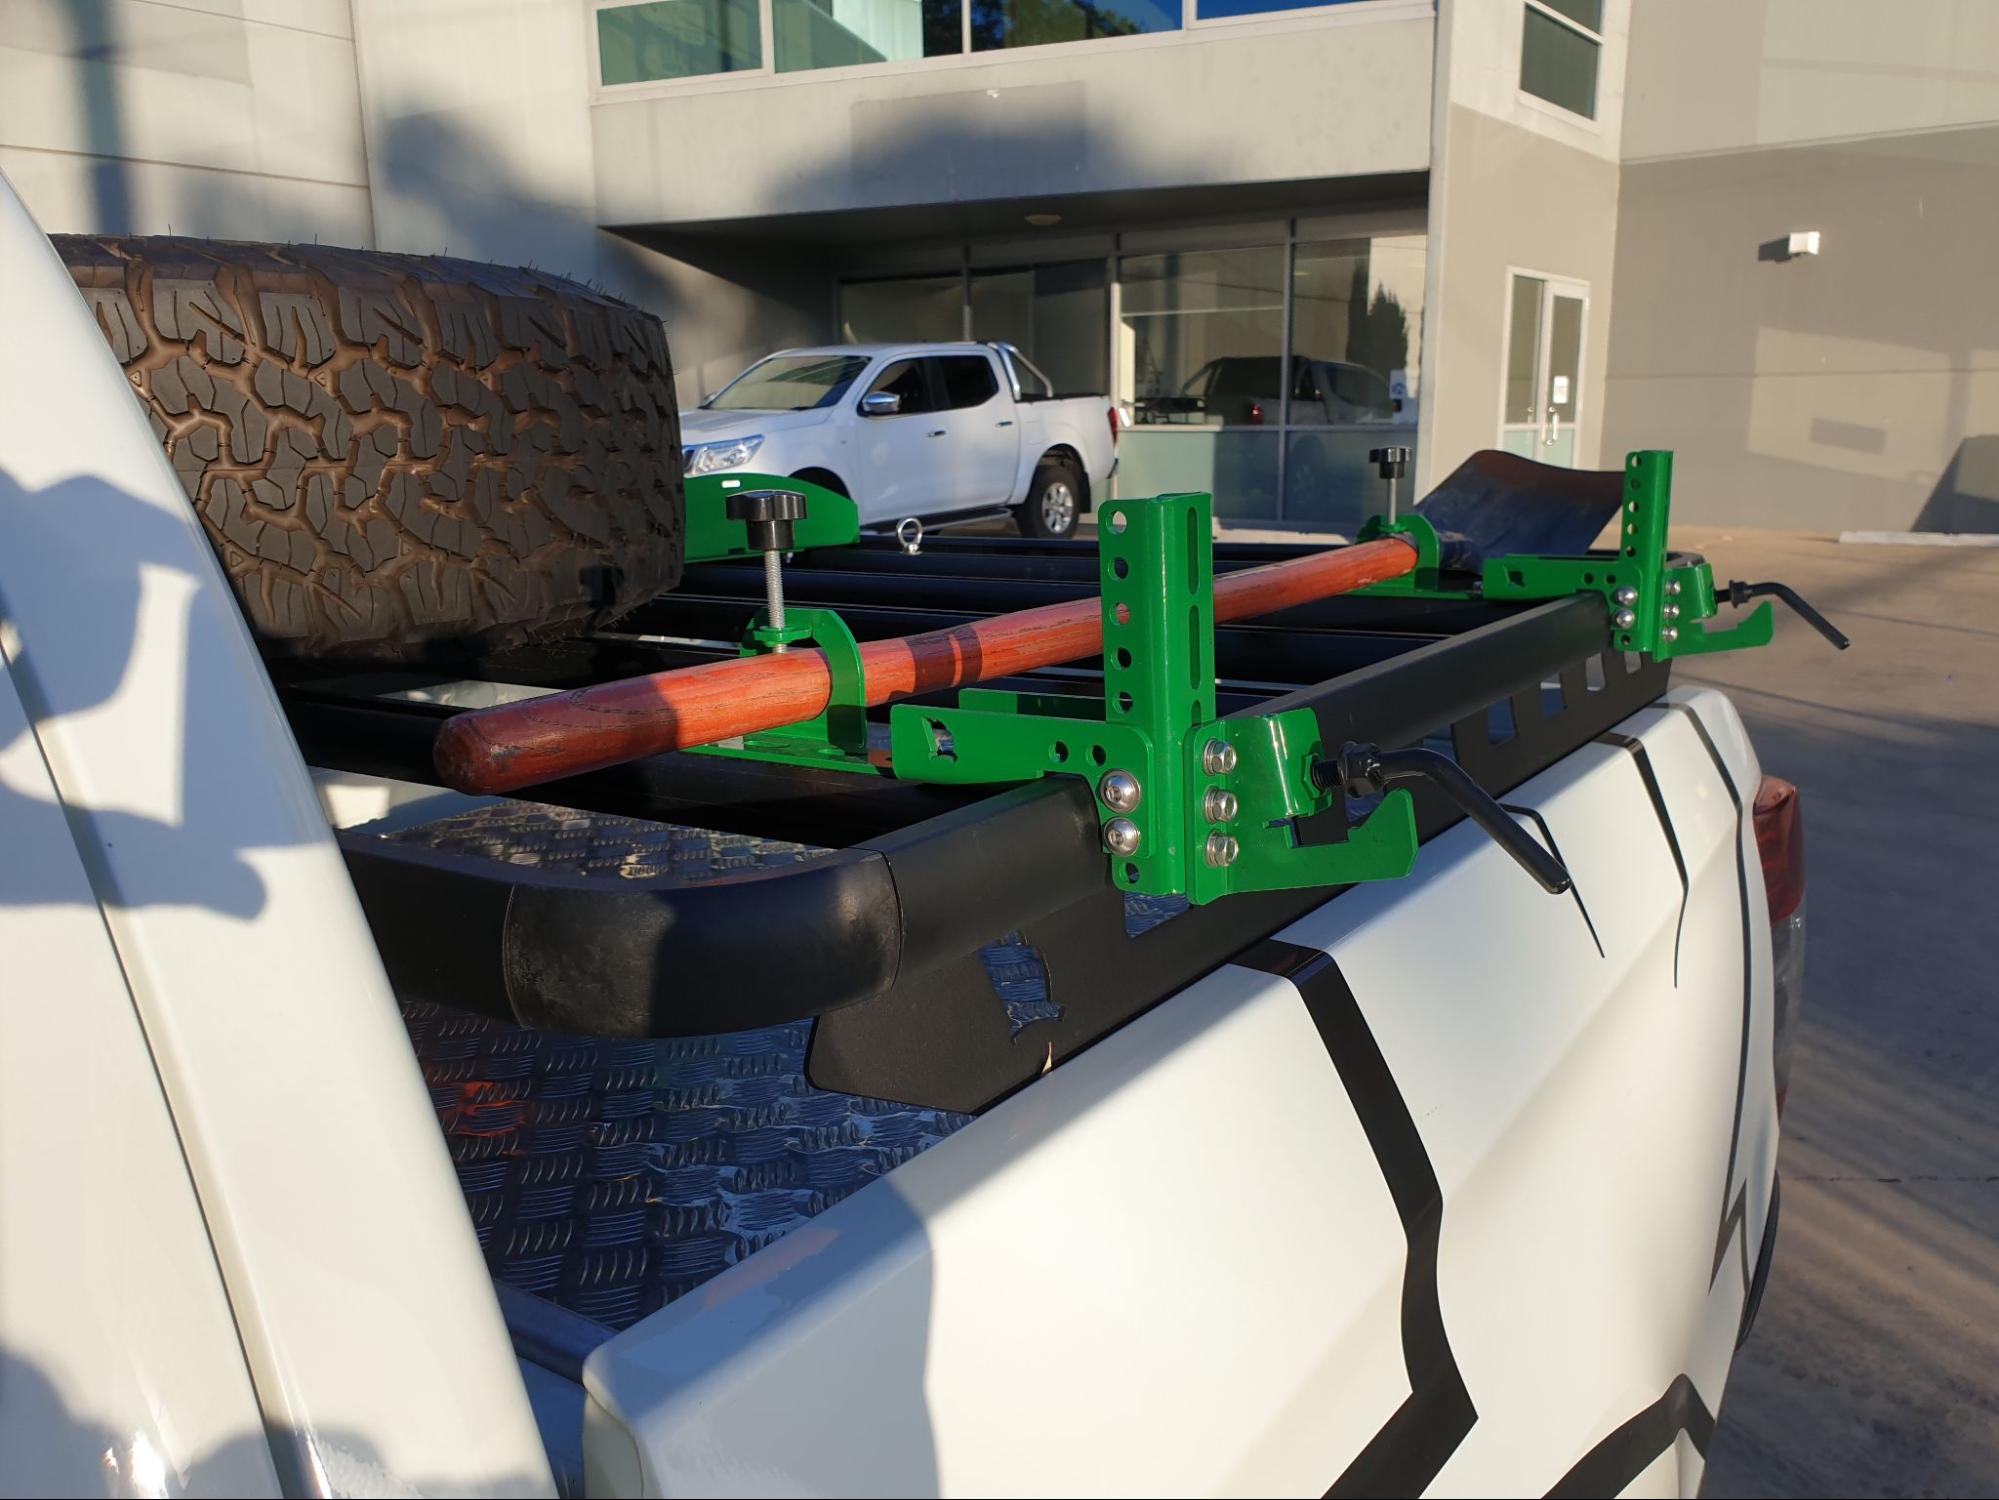 Common mistakes when loading roof racks